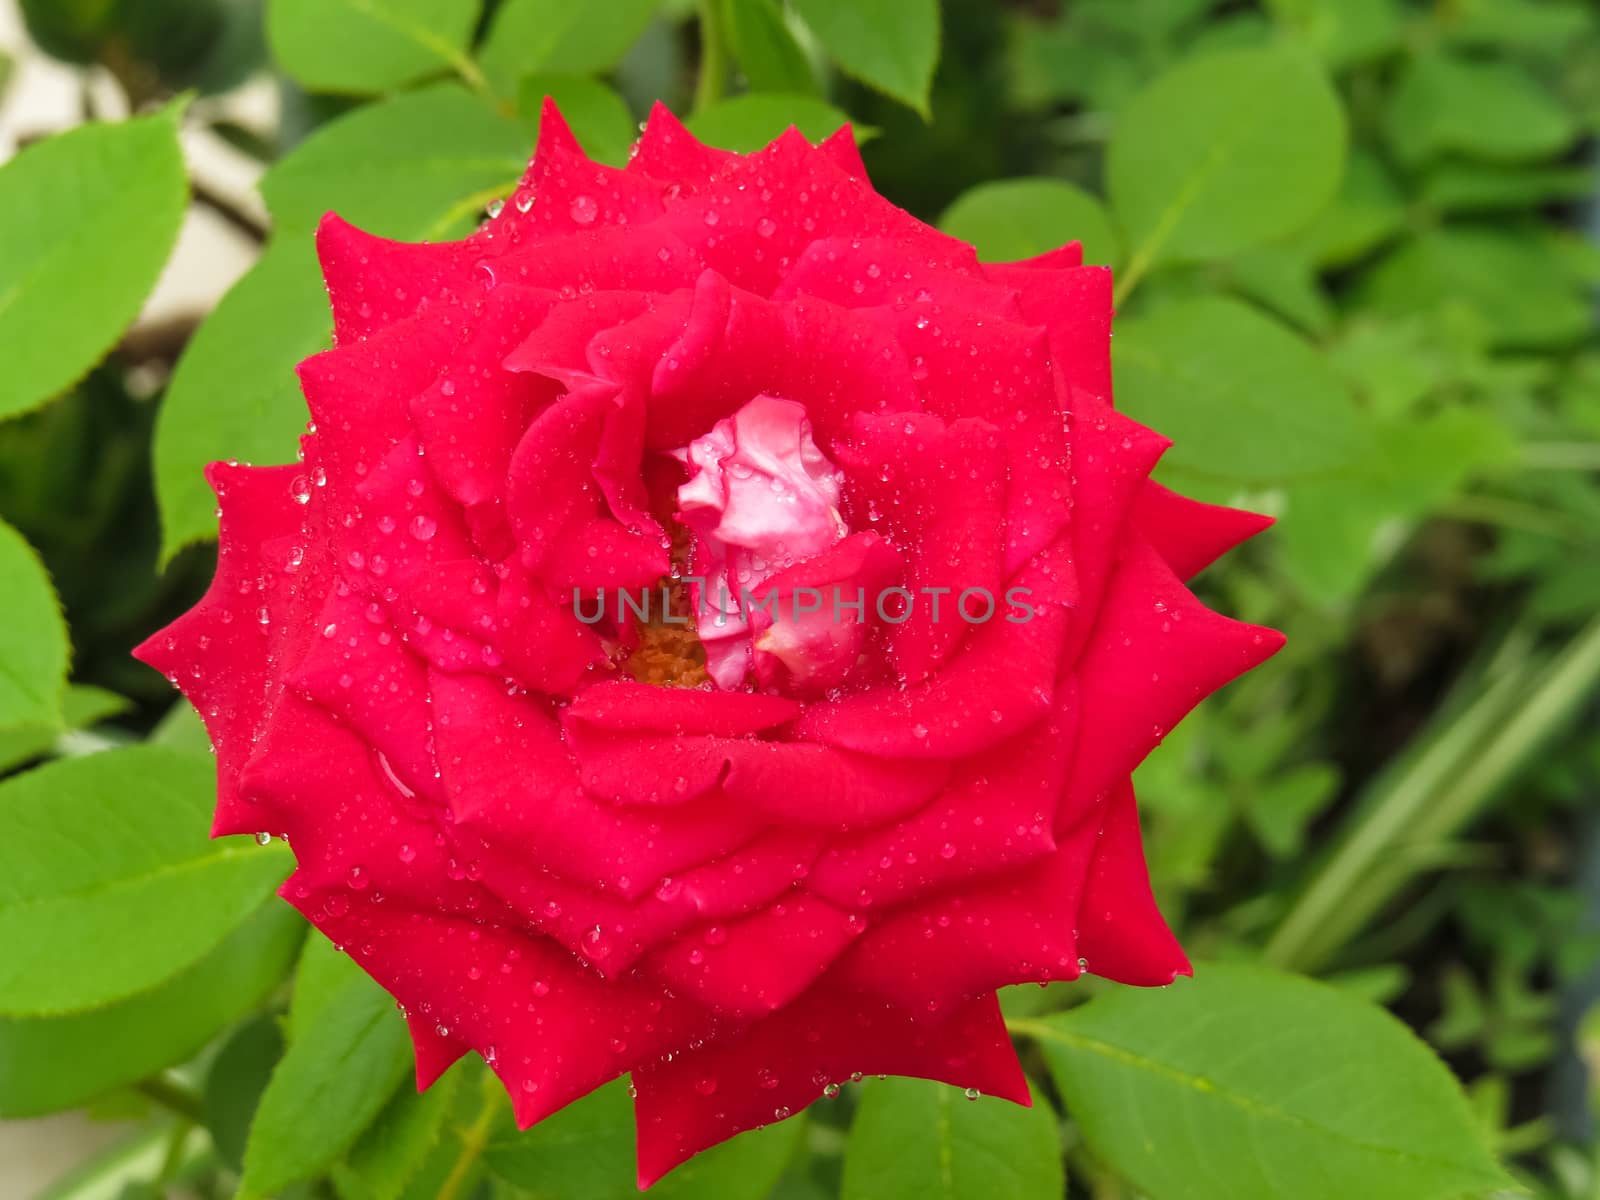 Blooming red rose with water drops on its petals and blurred green background.